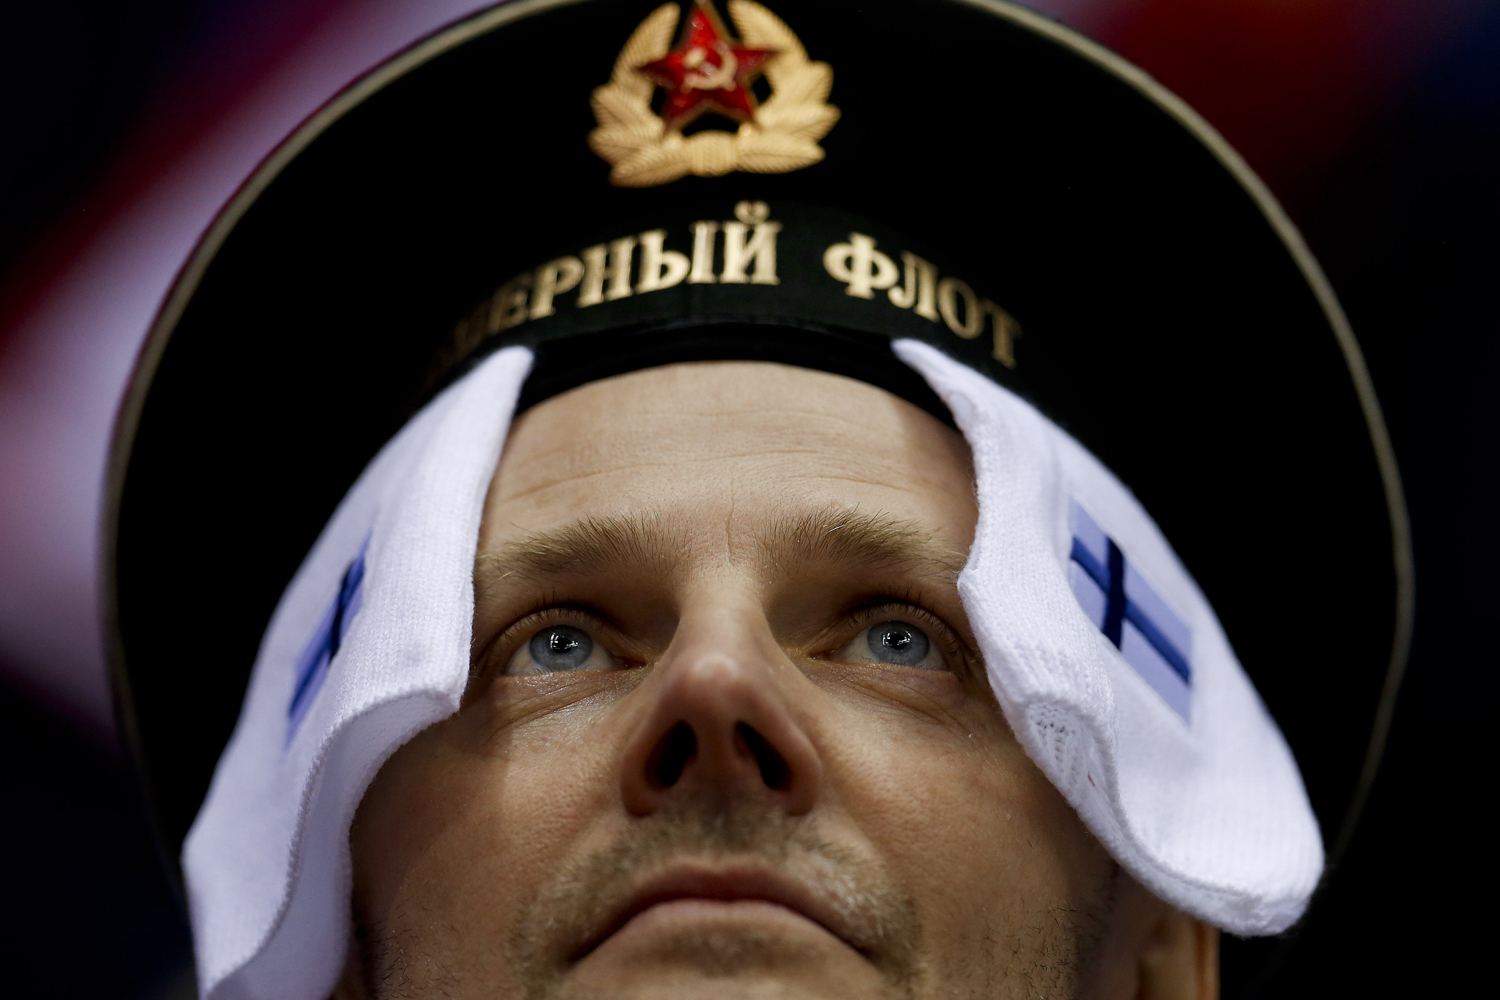 A hockey fan wears symbols from the Finnish flag before a men's ice hockey game against Canada at the 2014 Winter Olympics, Sunday, Feb. 16, 2014, in Sochi, Russia.